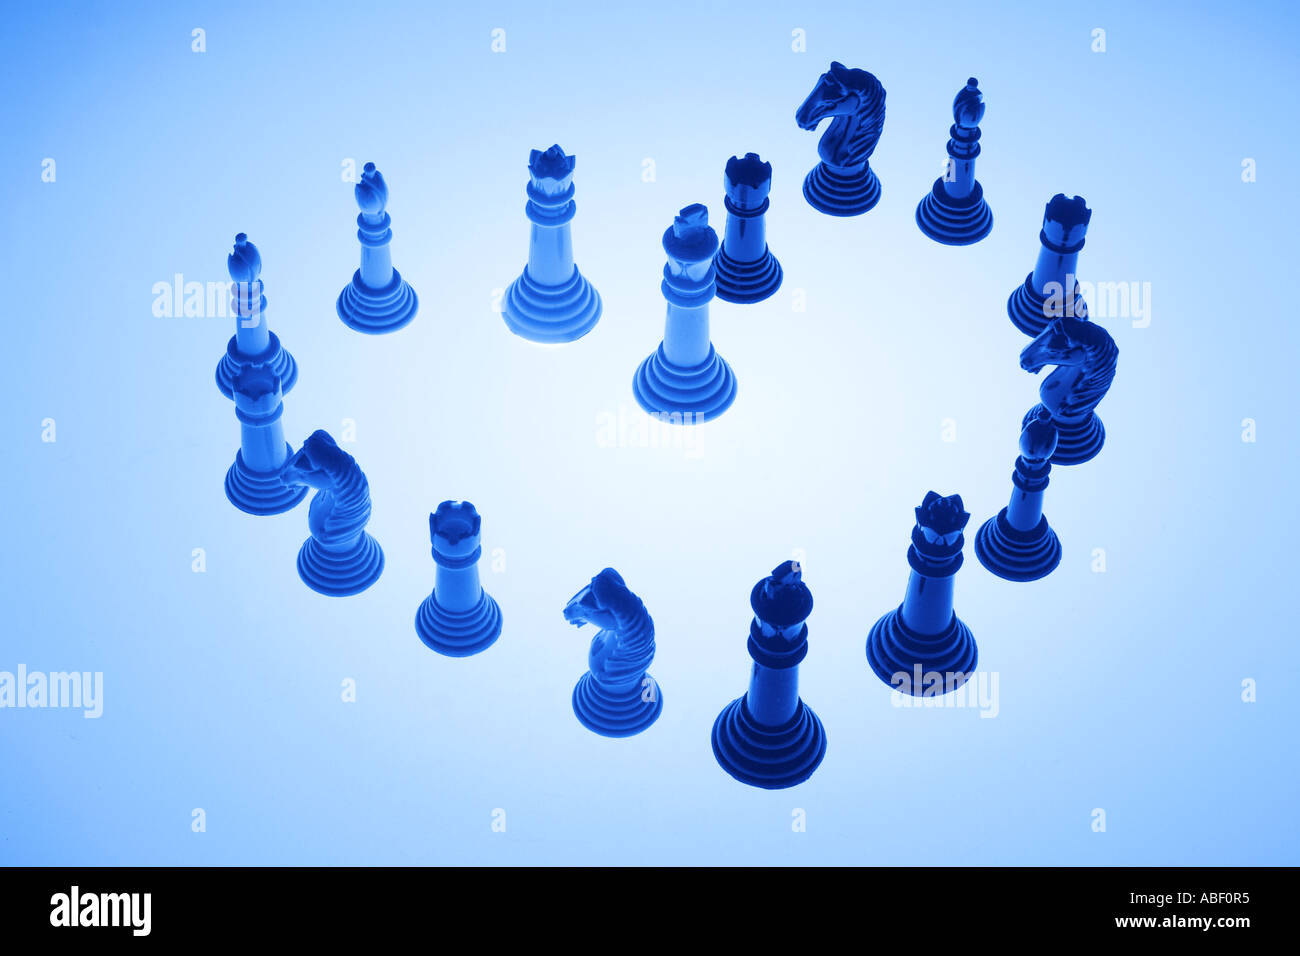 Chess Pieces Arranged in Shape of Heart Stock Photo